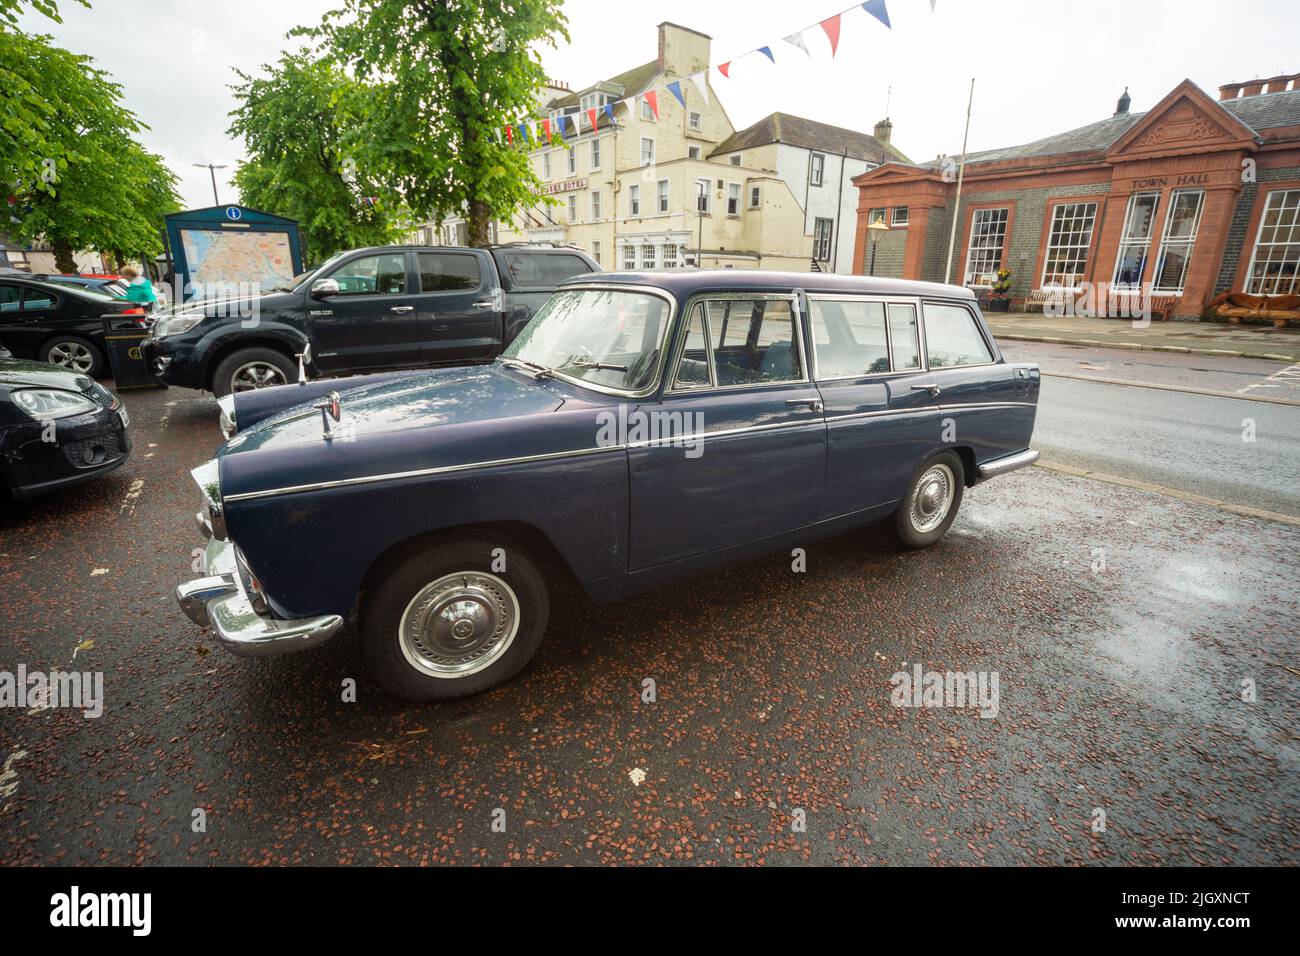 Blue Morris Oxford car for sale, parked on High Street, Moffat, Scotland, UK Stock Photo